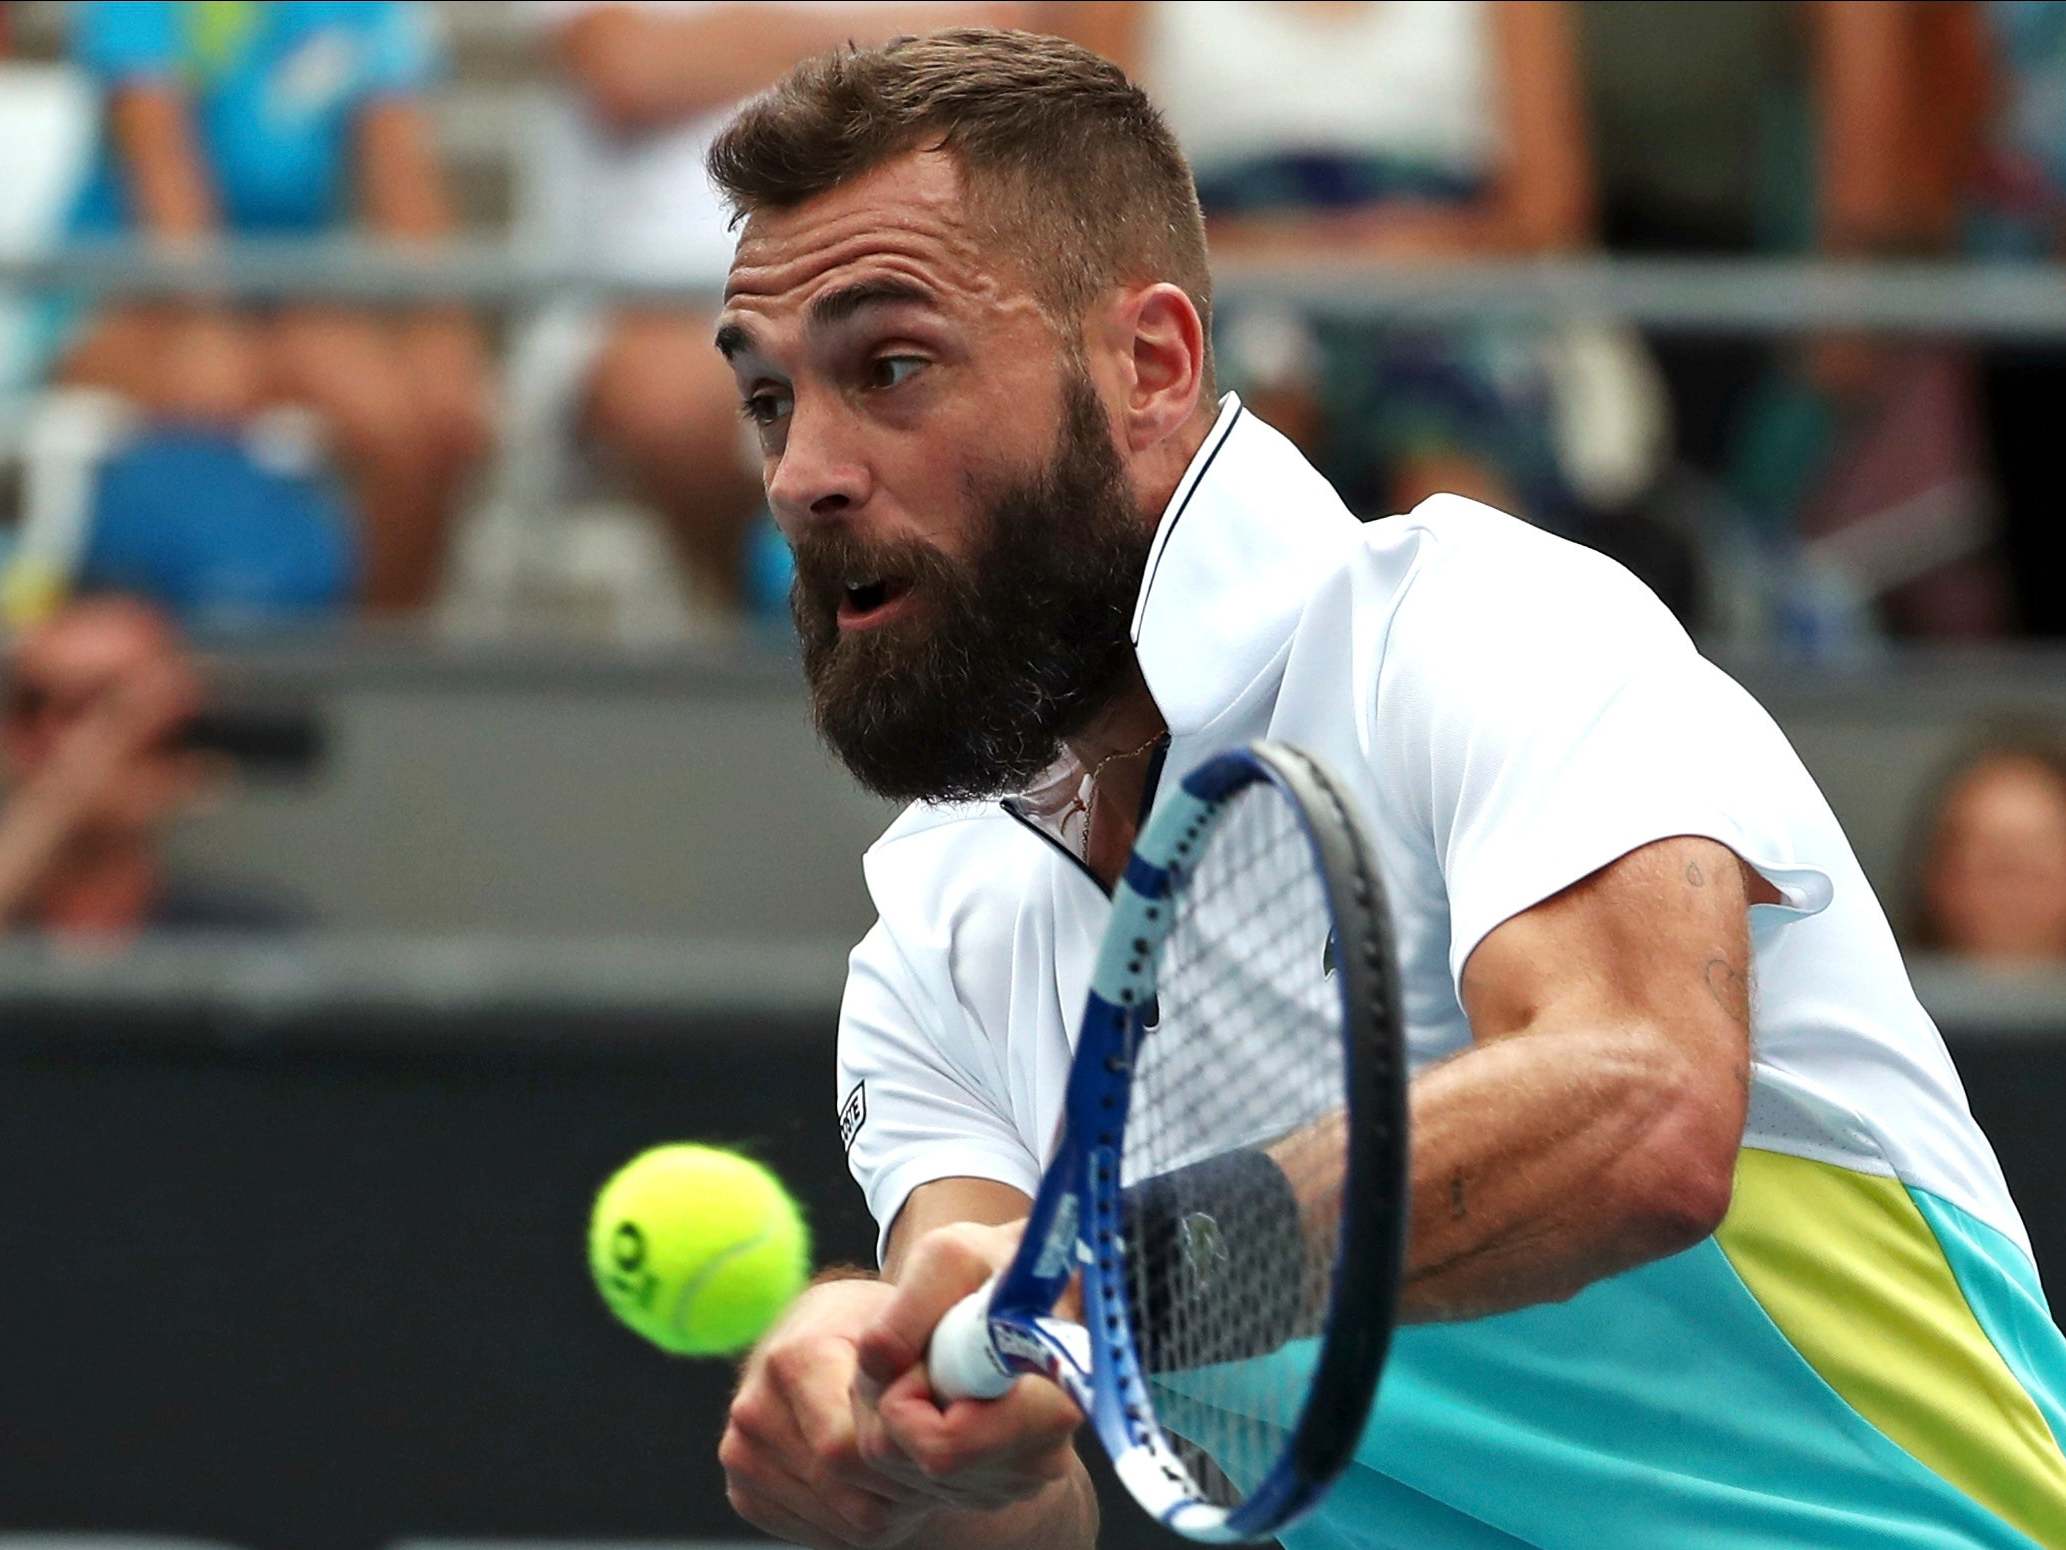 Benoit Paire has withdrawn from the US Open after testing positive for coronavirus